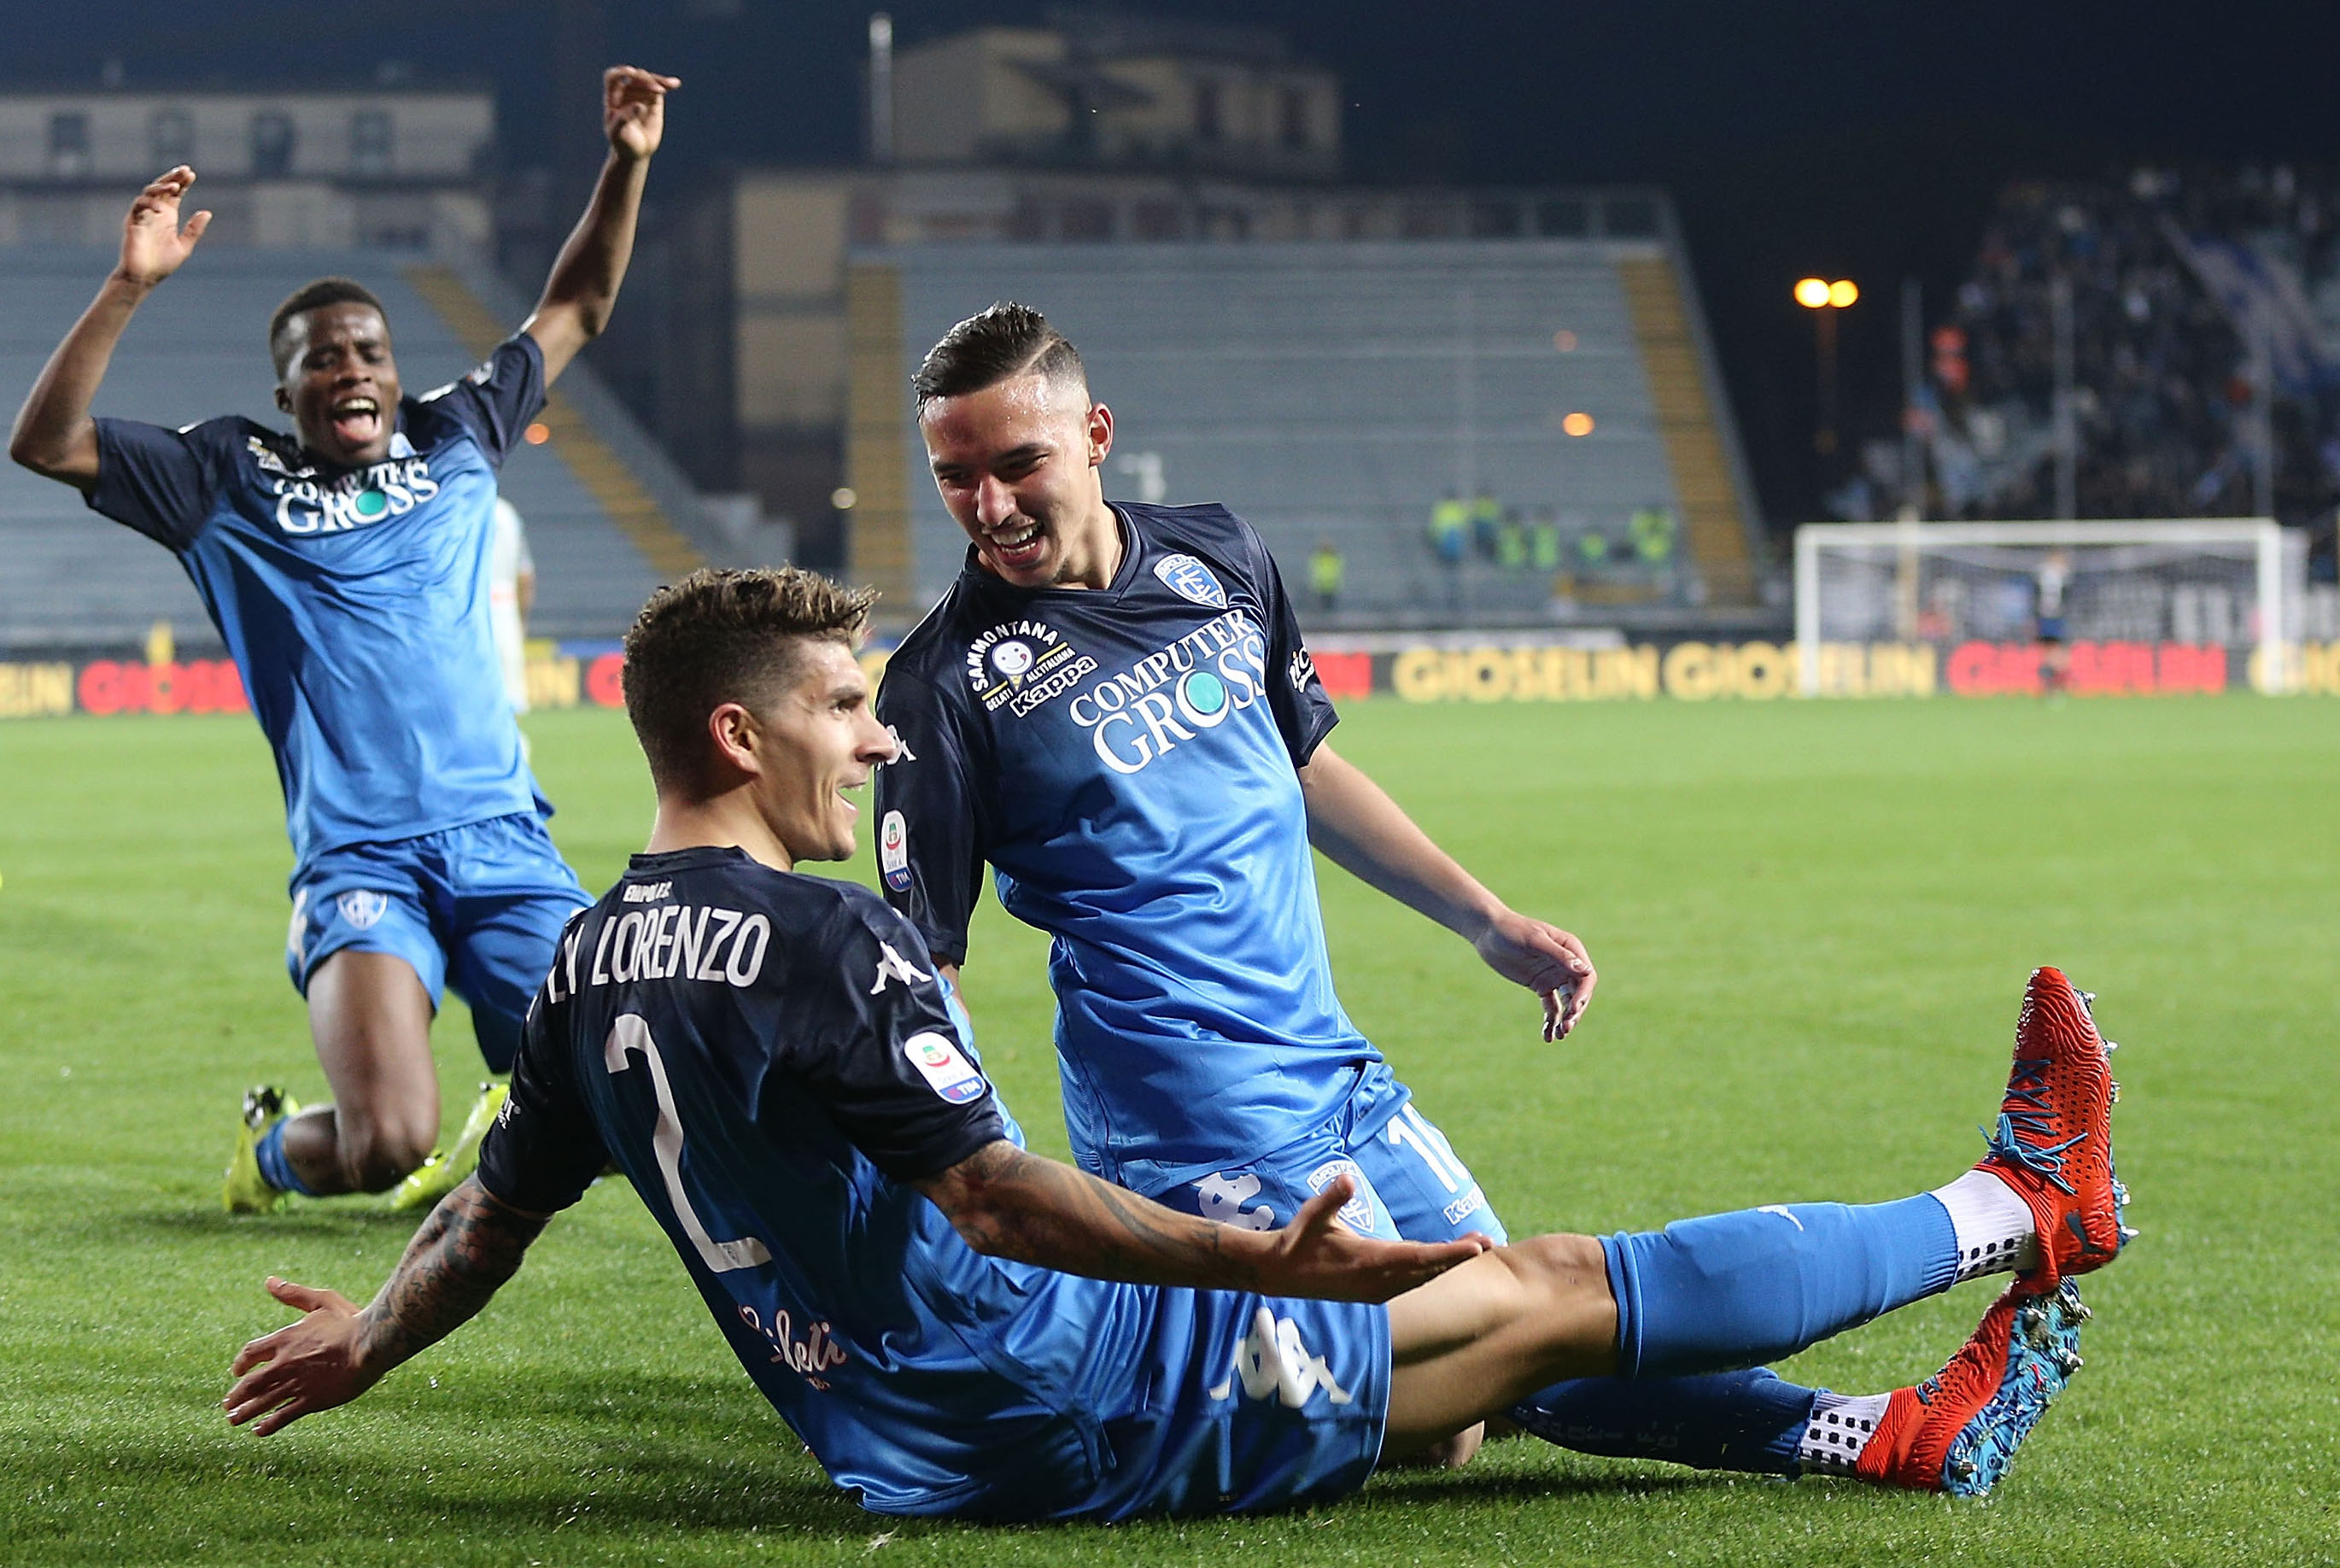 EMPOLI, ITALY - APRIL 03: Giovanni Di Lorenzo of Empoli FC celebrates after scoring a goal during the Serie A match between Empoli and SSC Napoli at Stadio Carlo Castellani on April 3, 2019 in Empoli, Italy.  (Photo by Gabriele Maltinti/Getty Images)